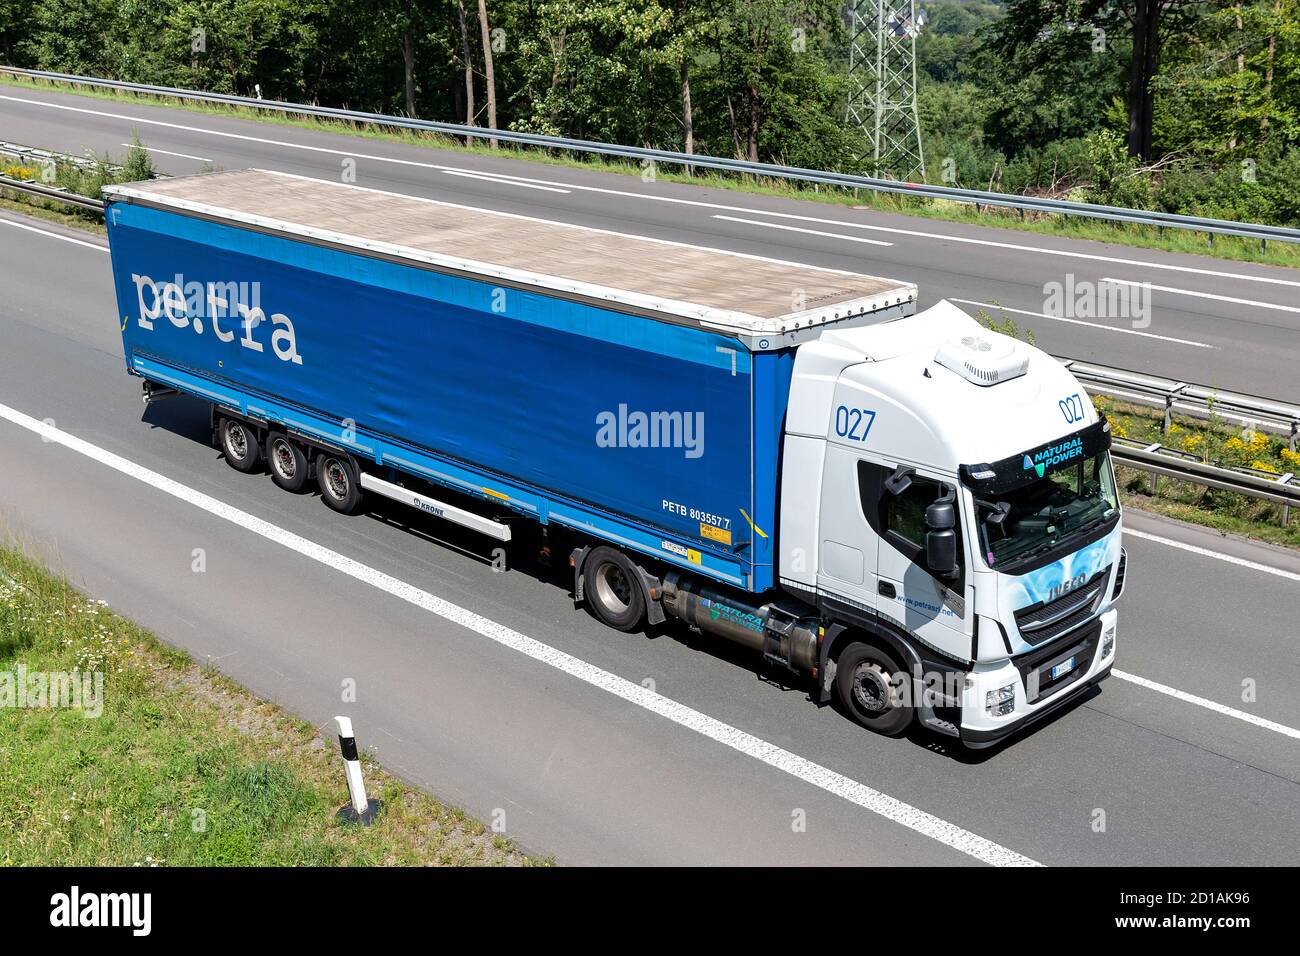 pe.tra Iveco Stralis truck with tarpaulin trailer on motorway. Stock Photo